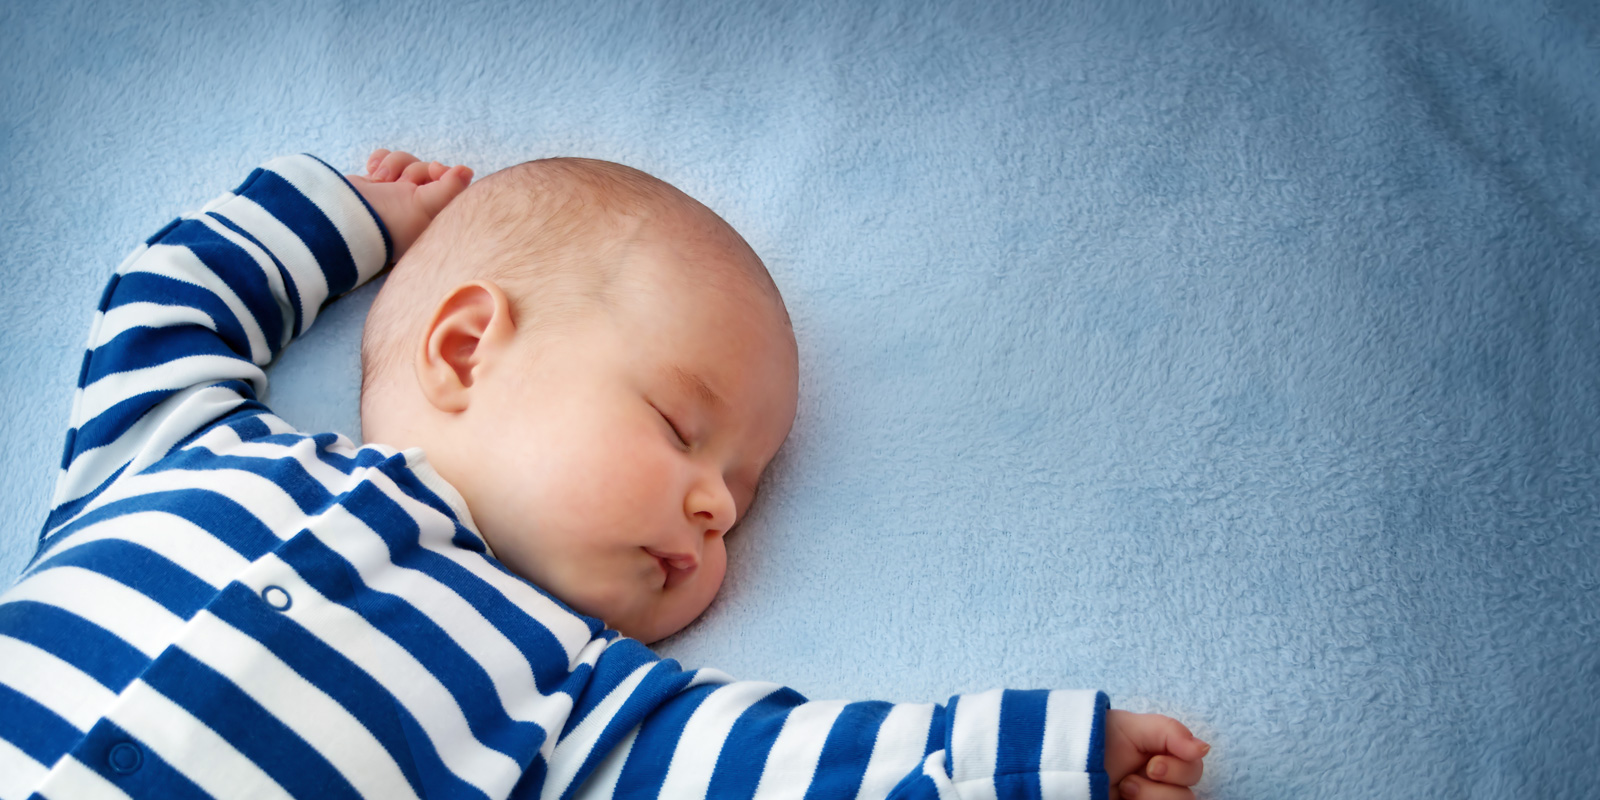 infant sleeping in crib with blue blanket